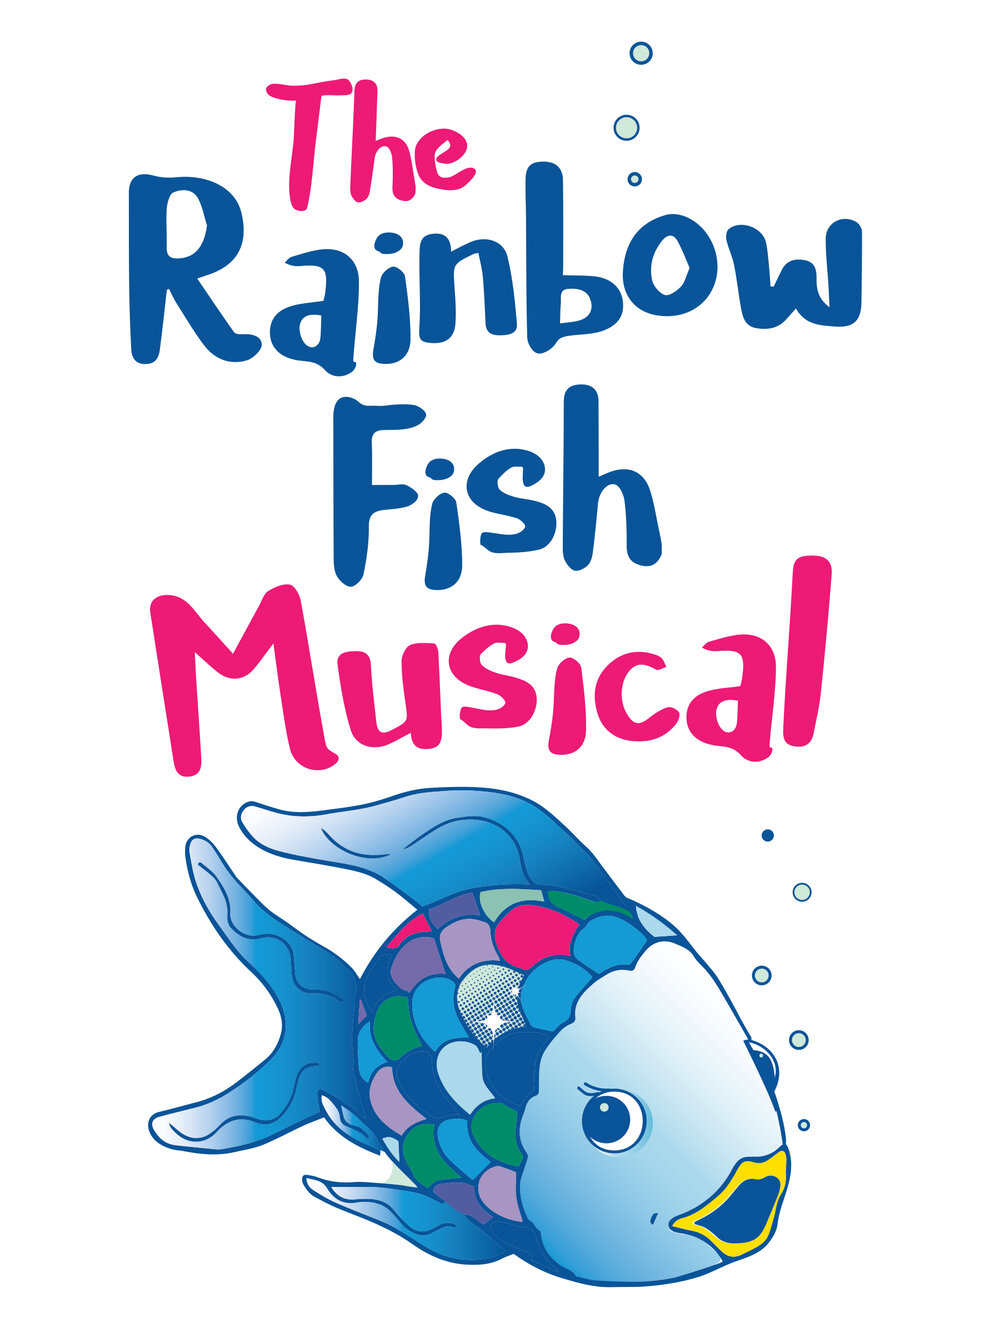 Image of a Rainbow fish with the musical title spelled out. 